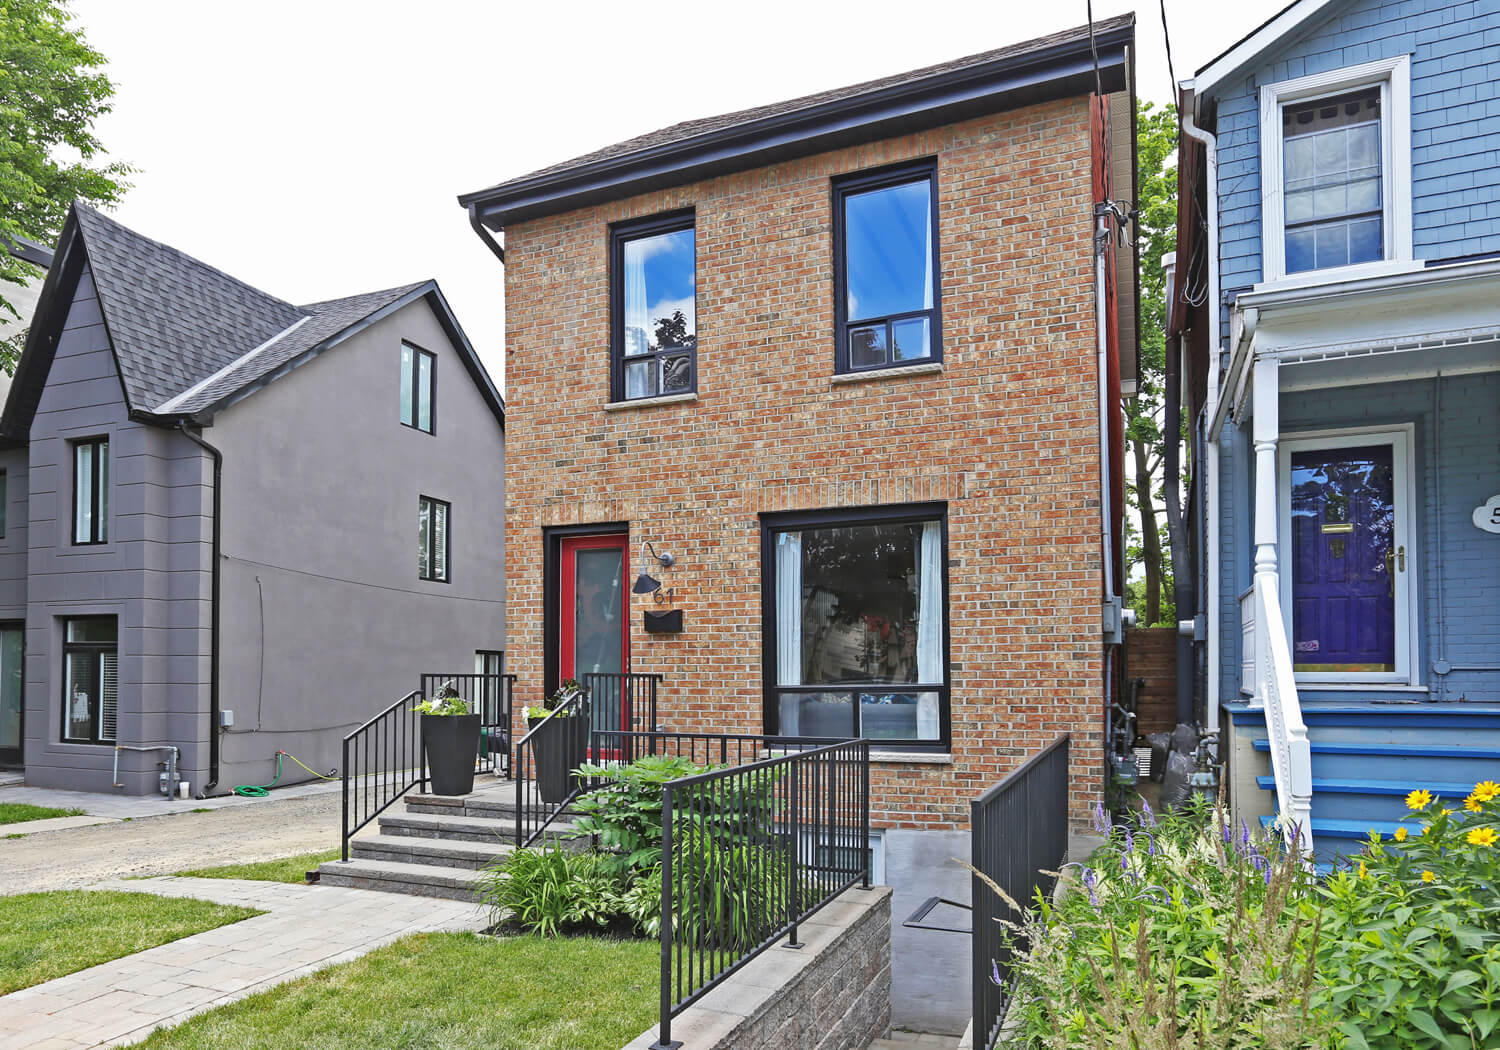 SALE OF THE WEEK: THE HOUSE THAT SHOWS WHAT $1 MILLION GETS YOU IN LESLIEVILLE | Craig Race